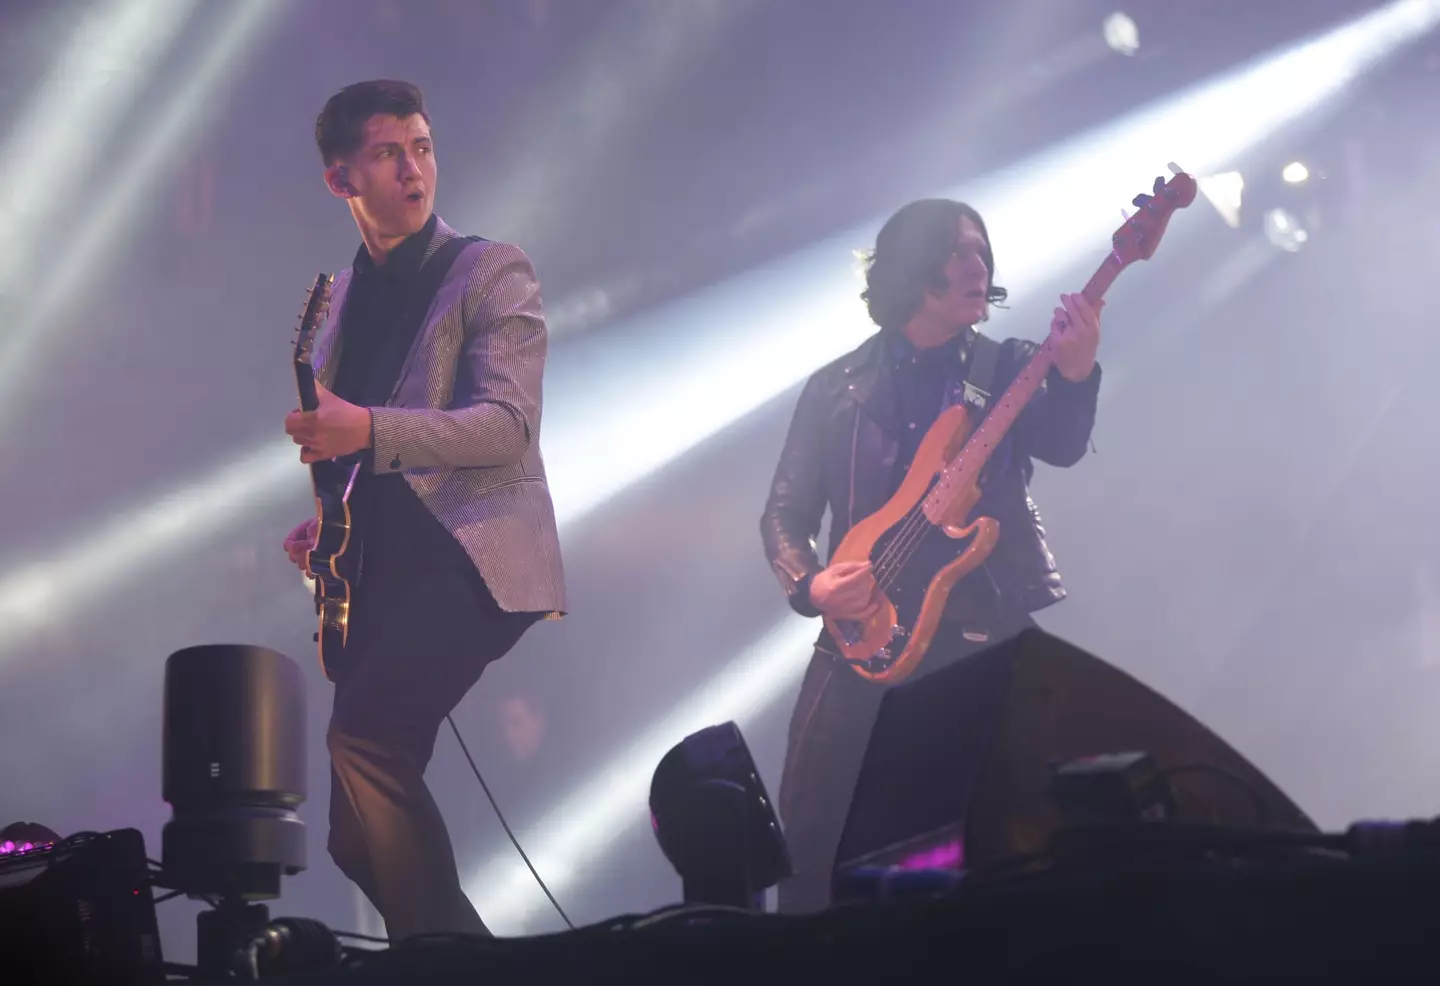 The band previously performed on the Pyramid Stage in 2013.